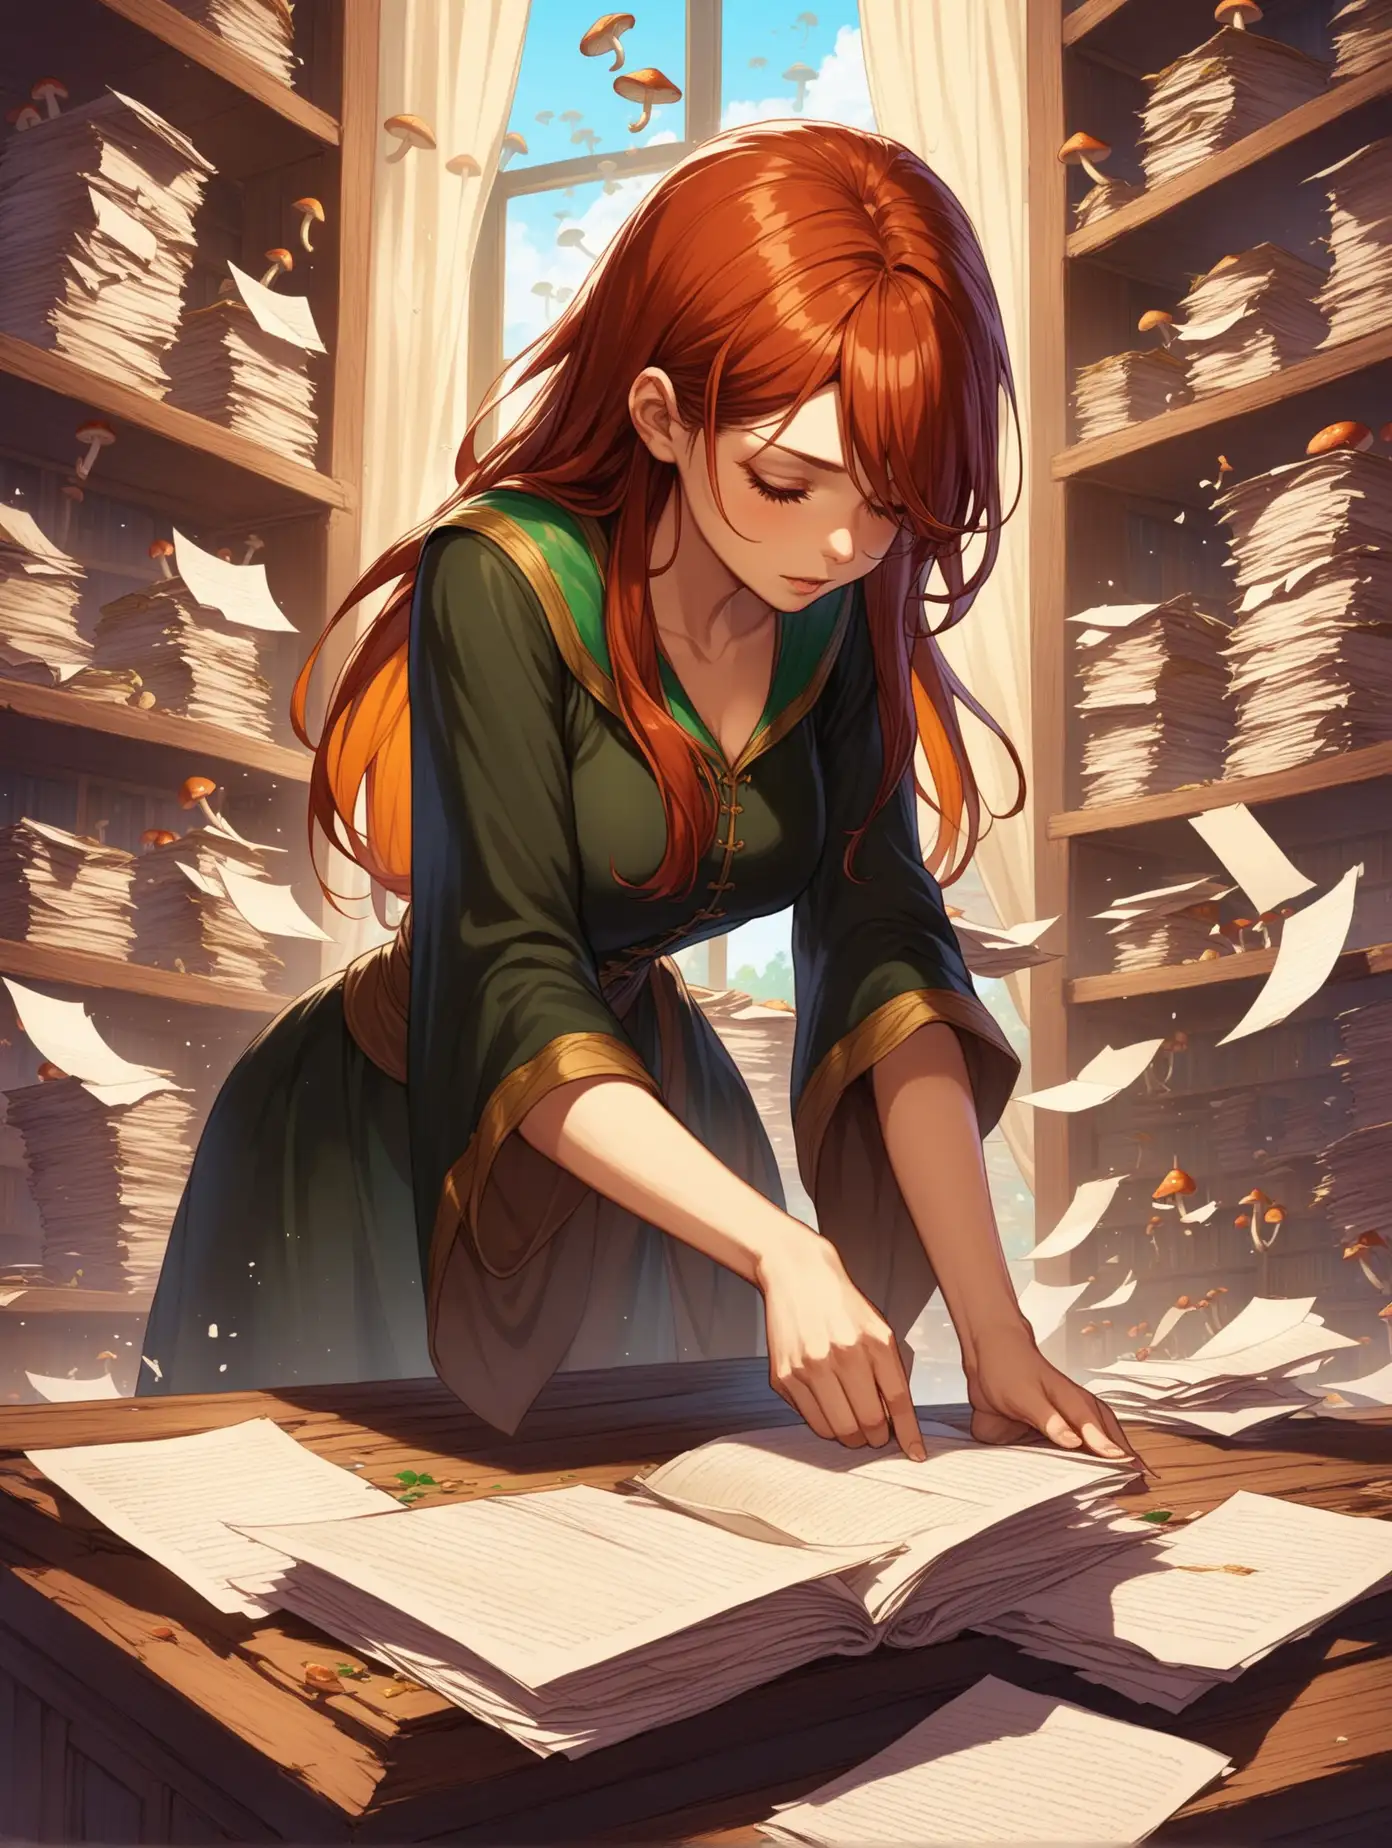 Arcanists Chaos Towering Paper Pile in Ancient Study with Mischievous Demons